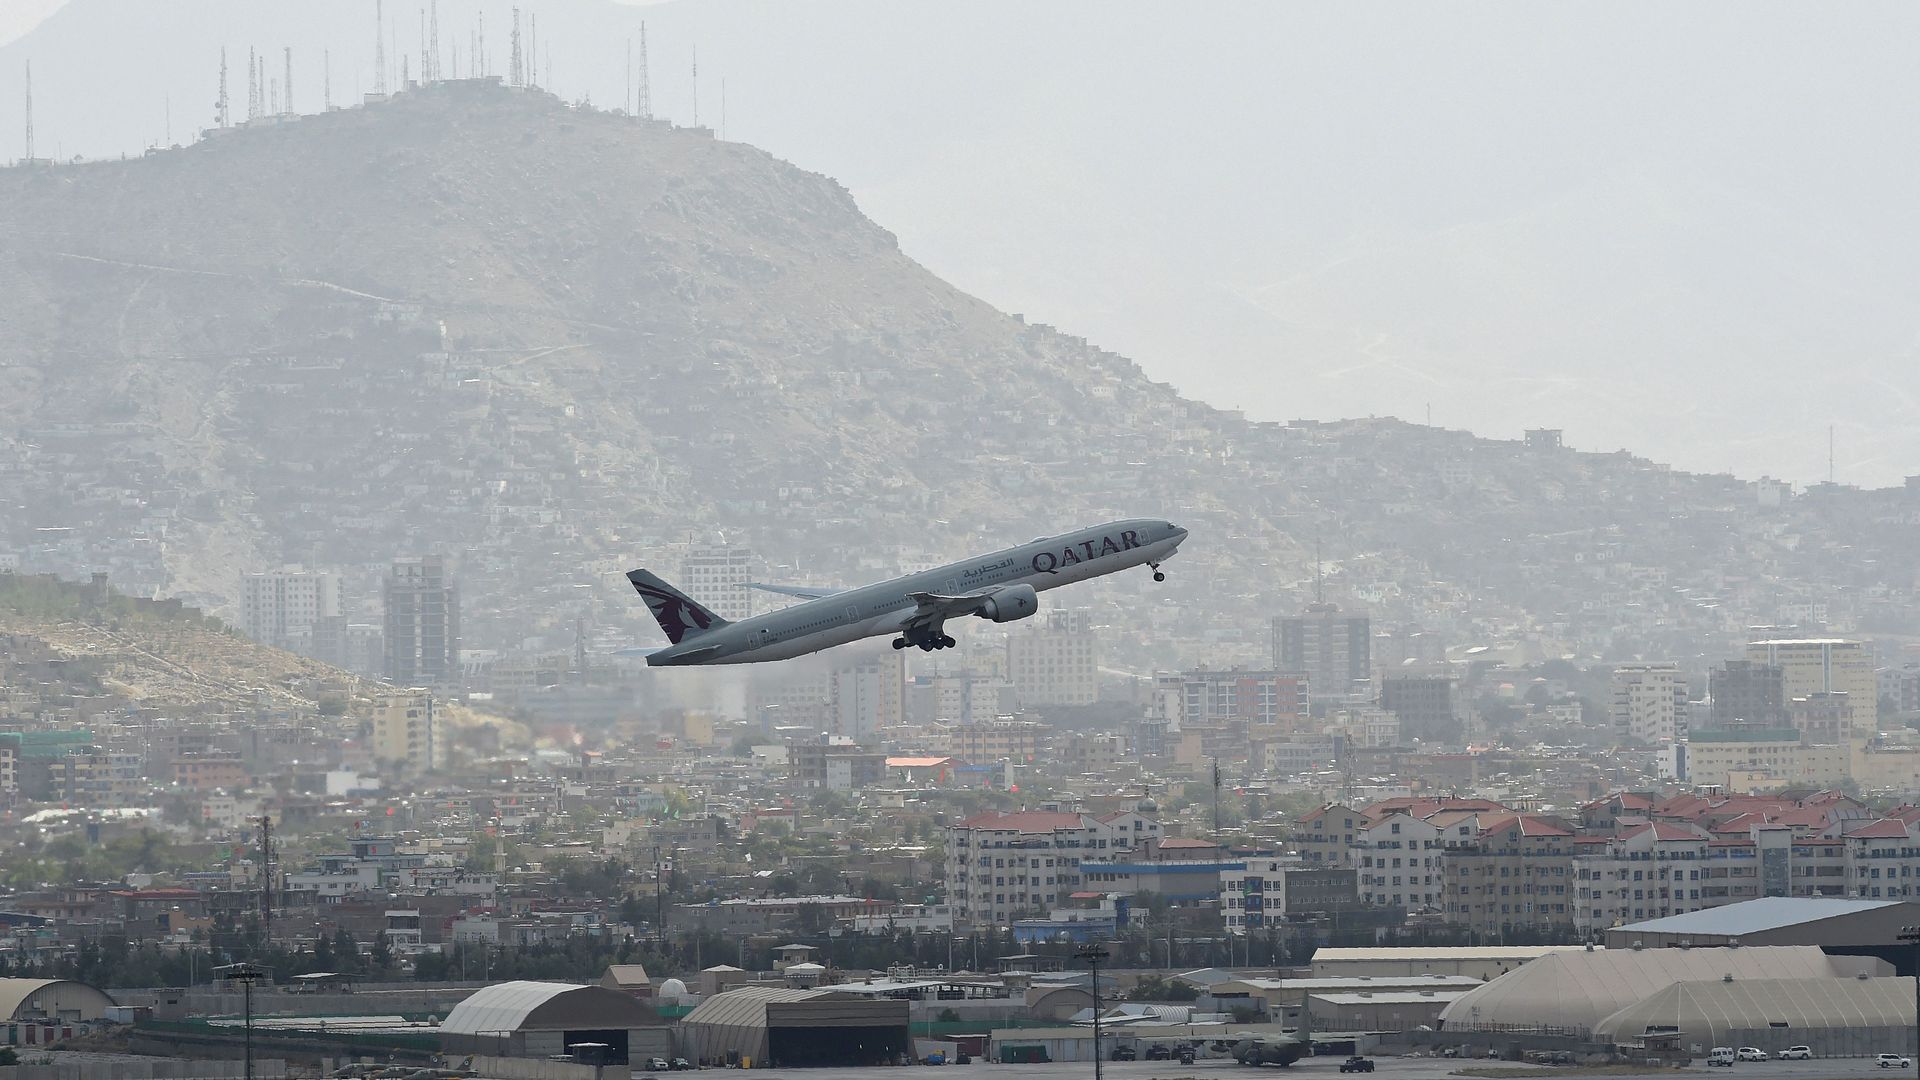 A Qatar Airways aircraft taking-off from the airport in Kabul on Saturday.